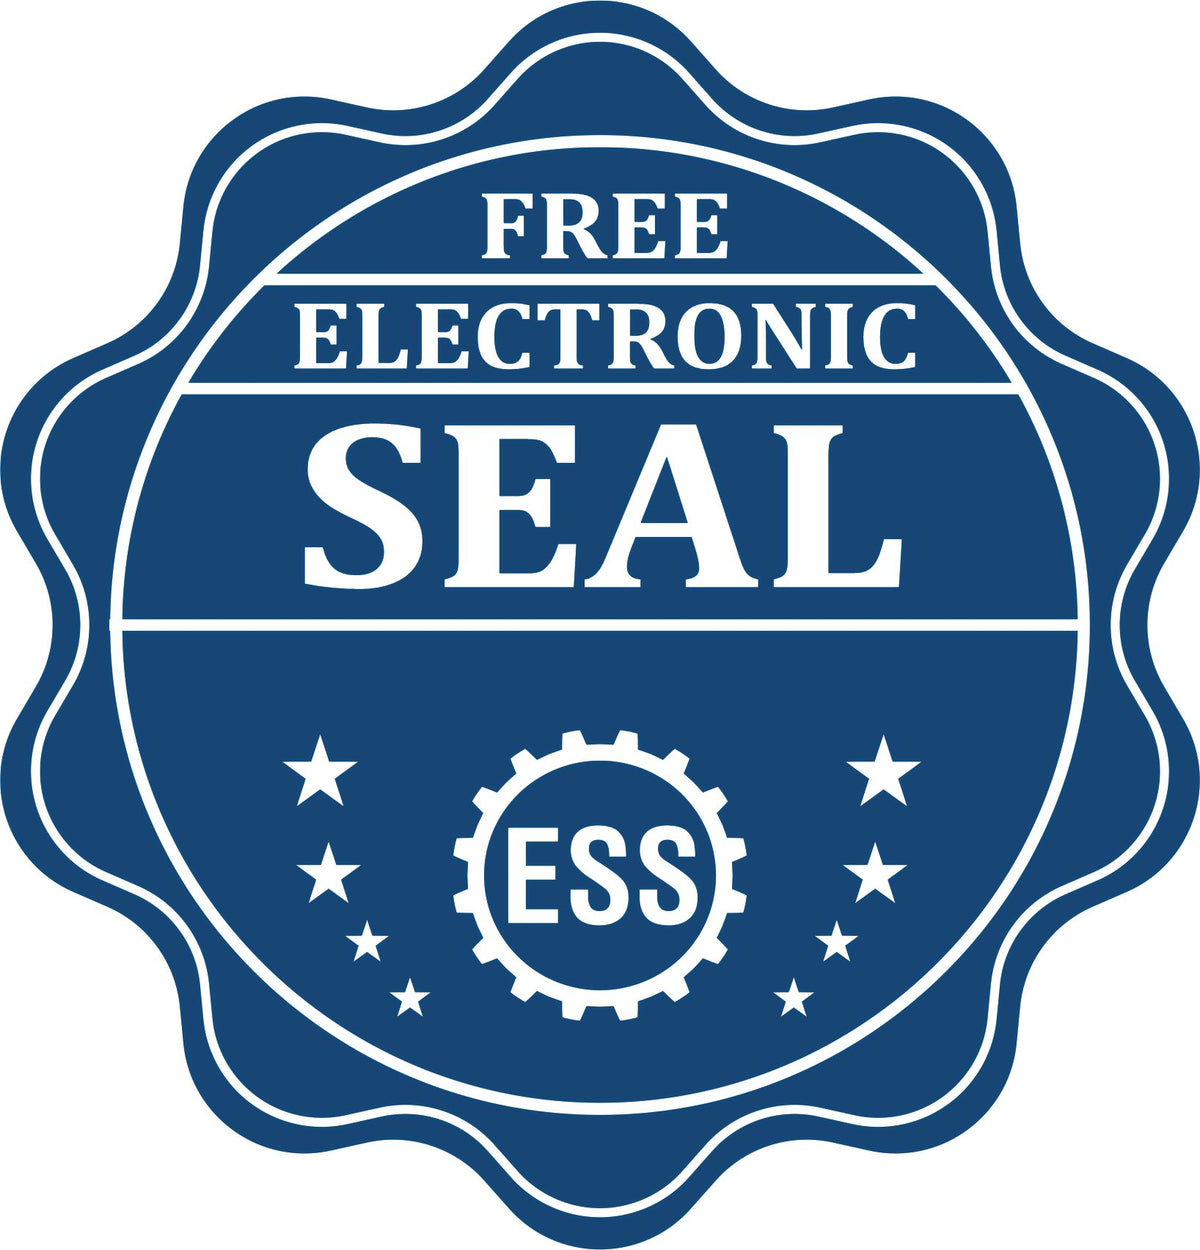 A badge showing a free electronic seal for the Slim Pre-Inked Louisiana Land Surveyor Seal Stamp with stars and the ESS gear on the emblem.